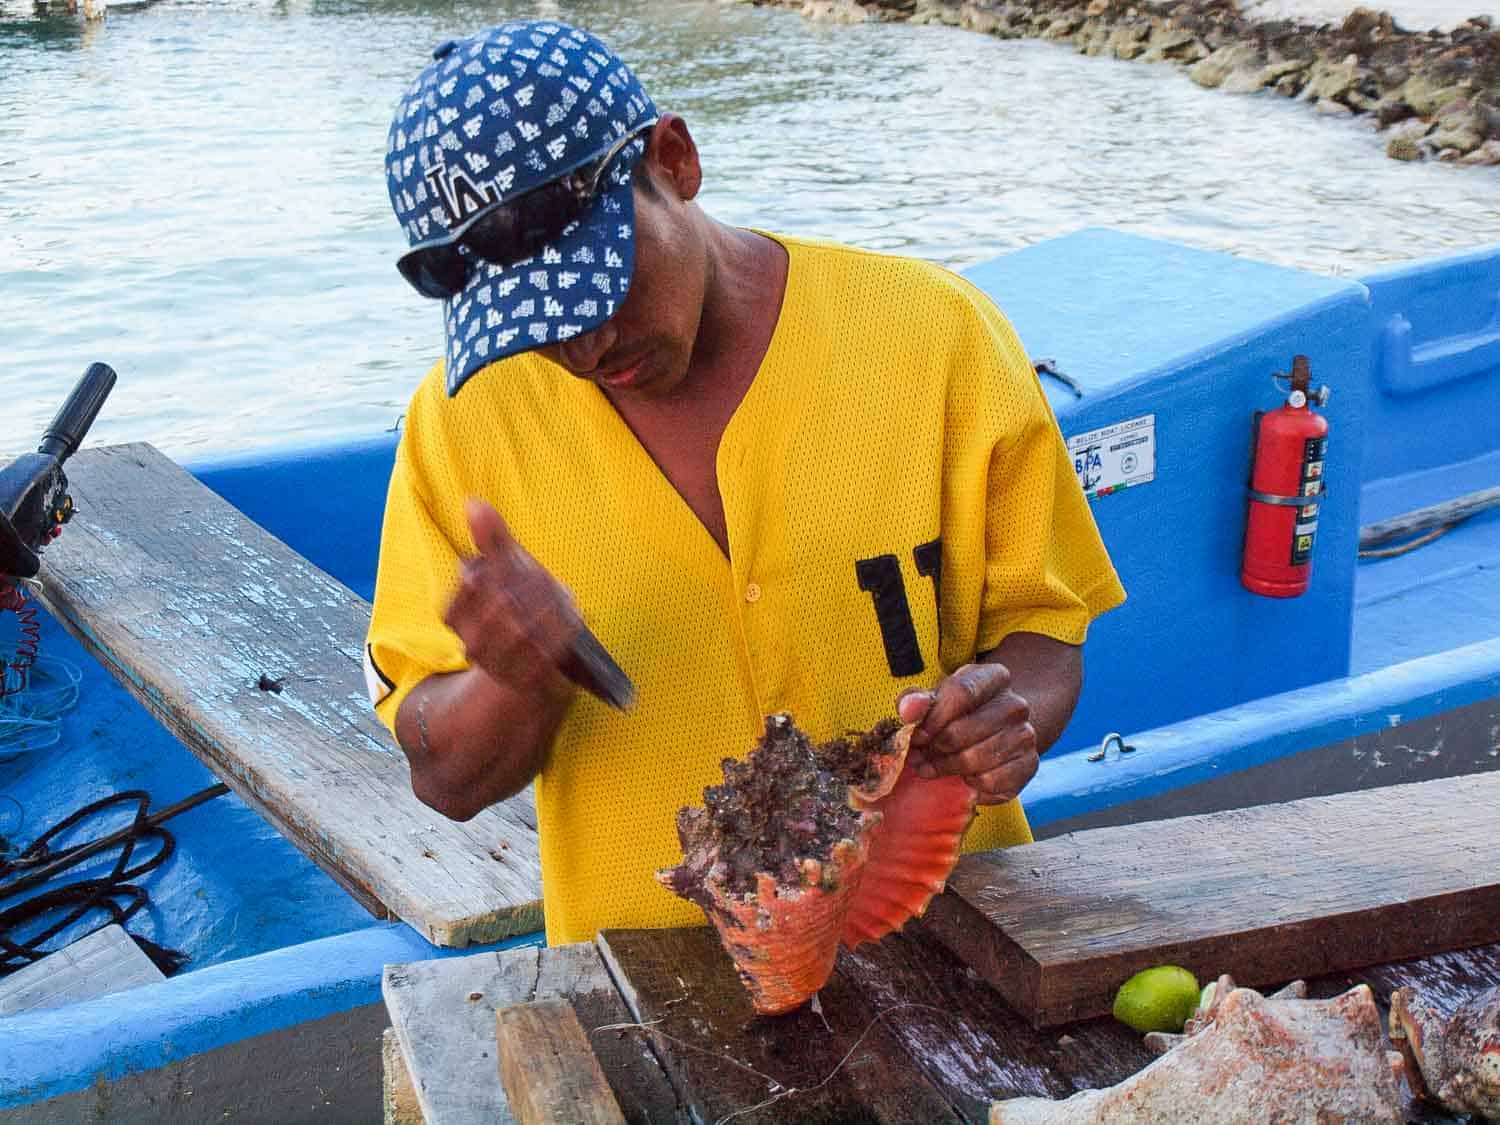 Man extracting conch in Belize to make soup